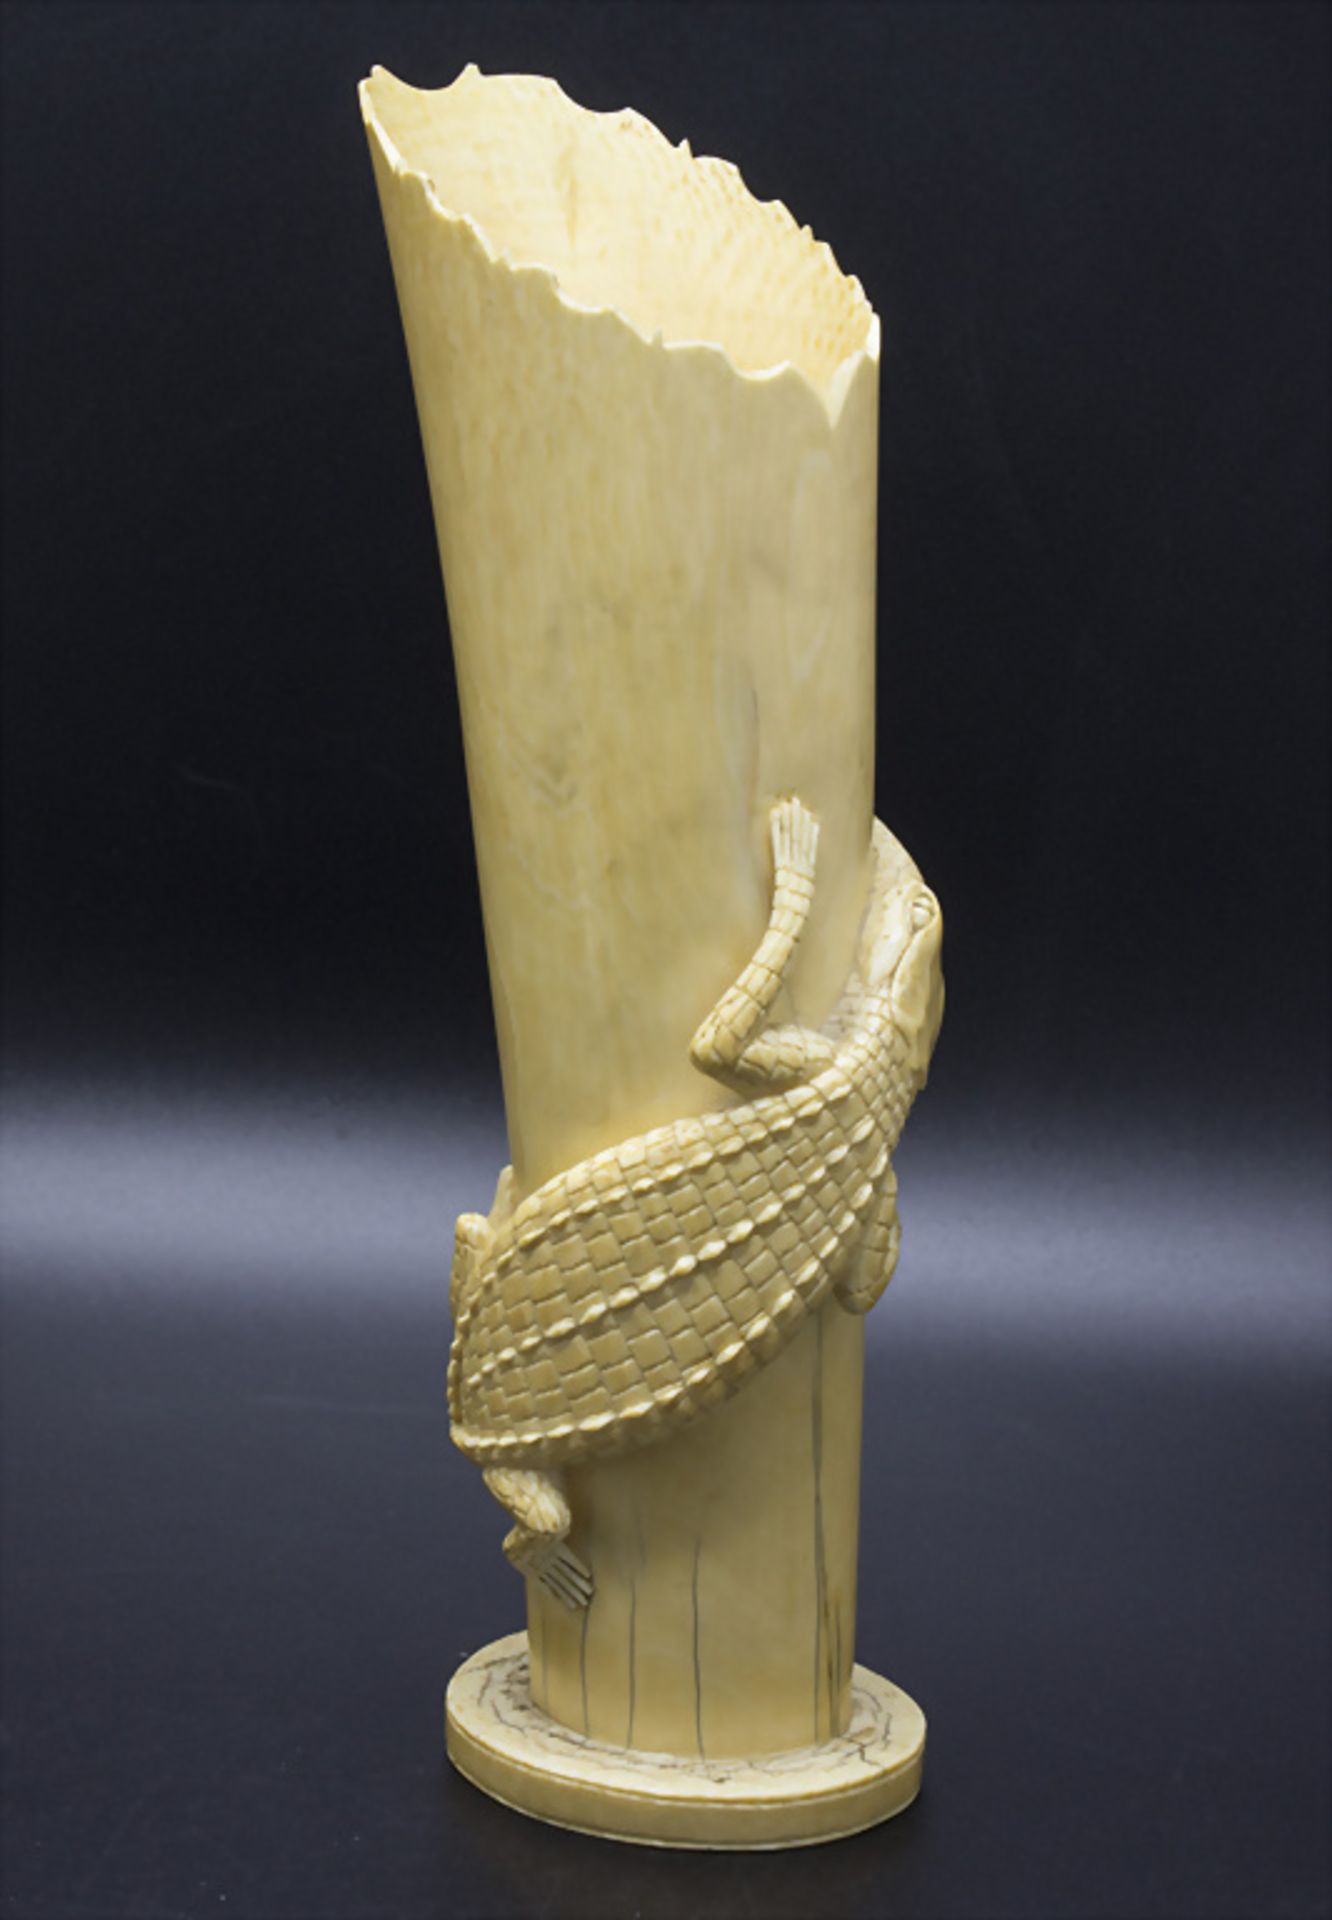 Ziervase mit Gavial / A decorative vase with a gavial, Asien/Afrika, 19. Jh.